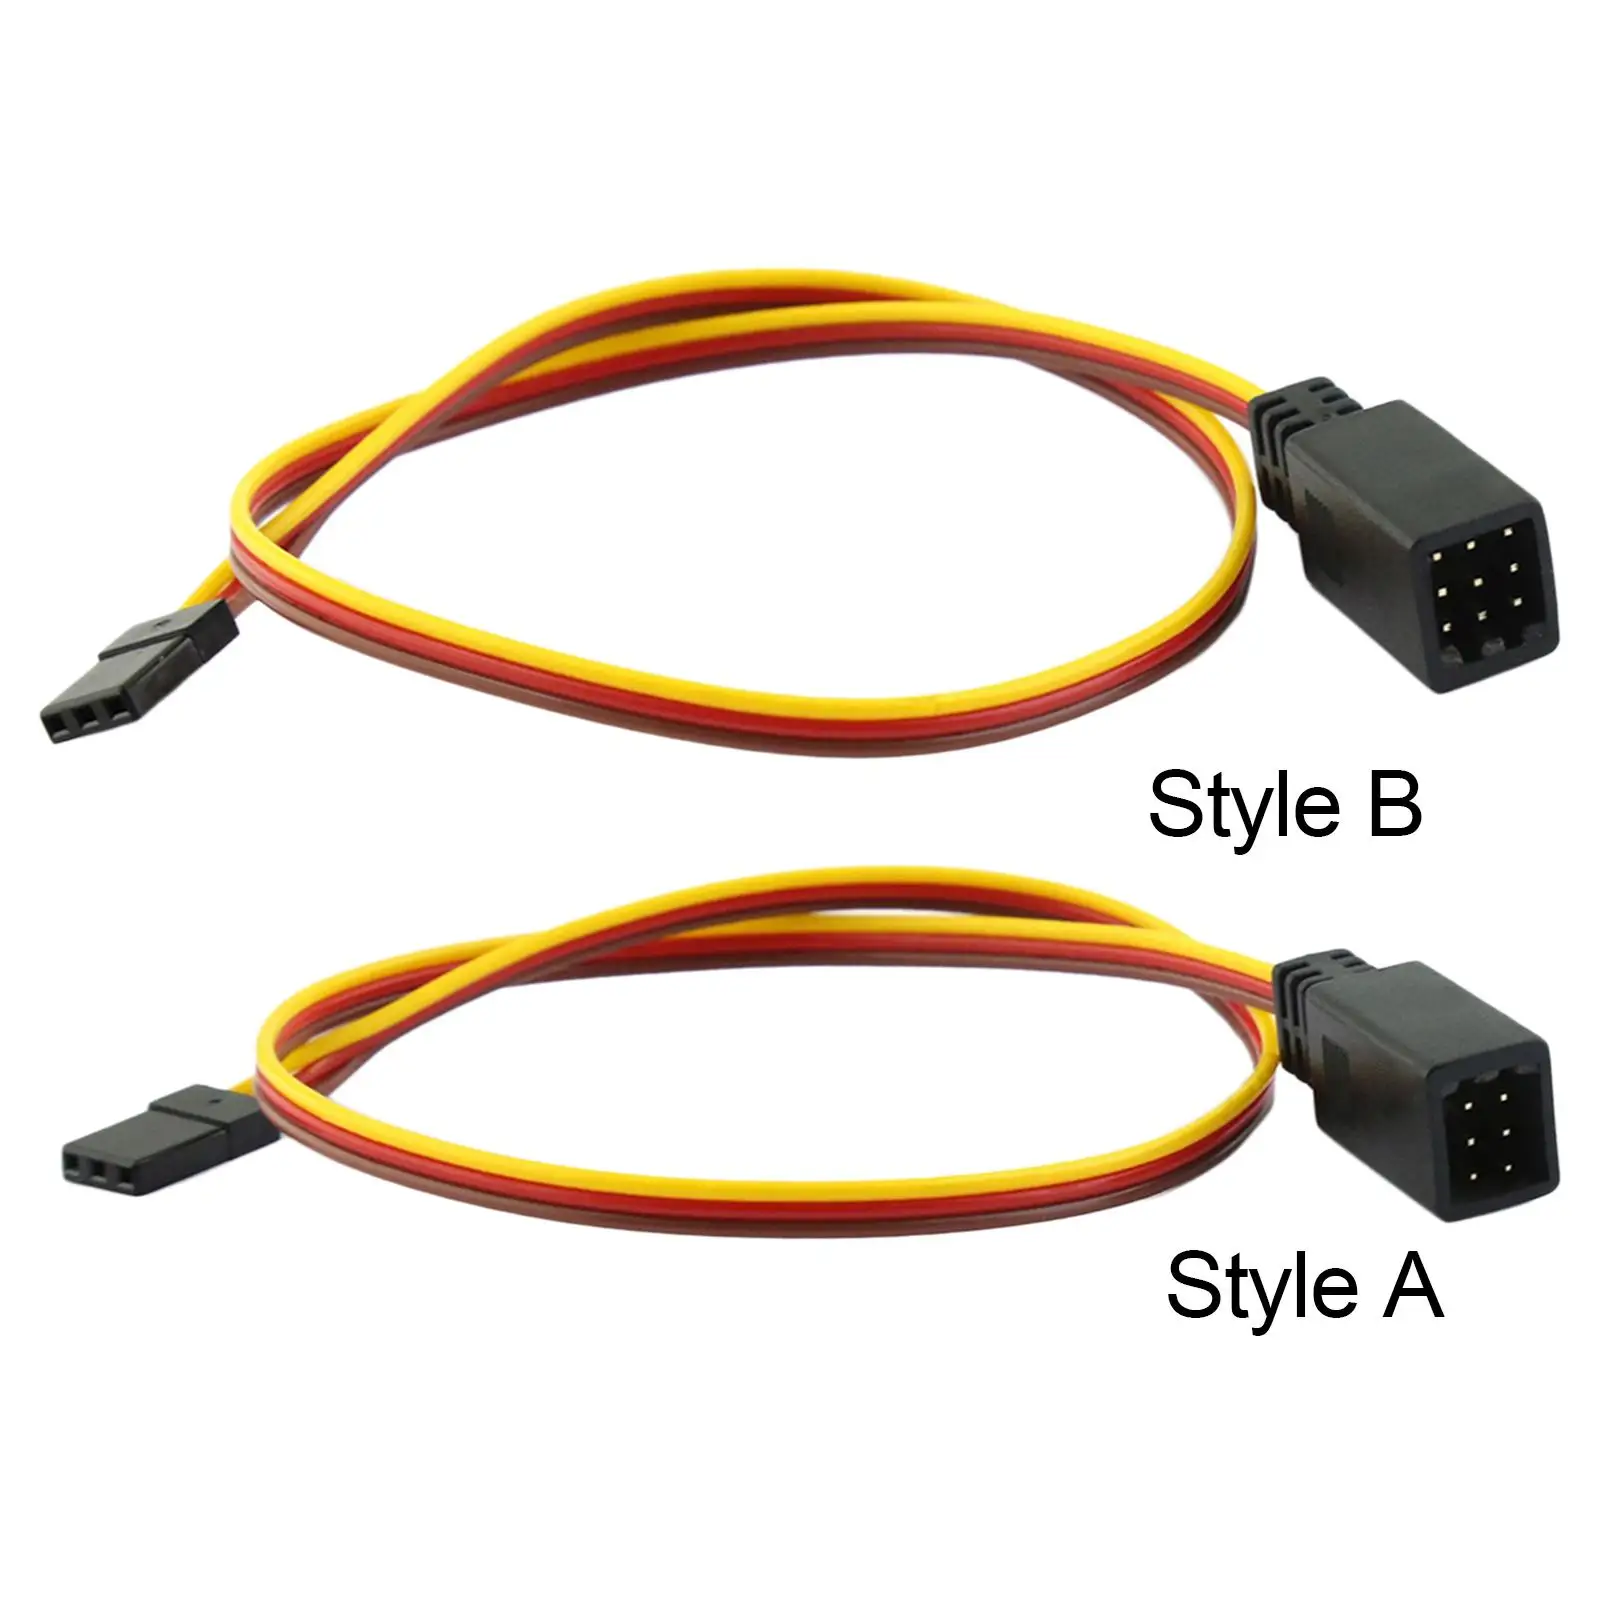 Servo Extension cable Cord JR Connector, Harness Leads Cable for RC Cars, Remote Control Vehicles Accessory